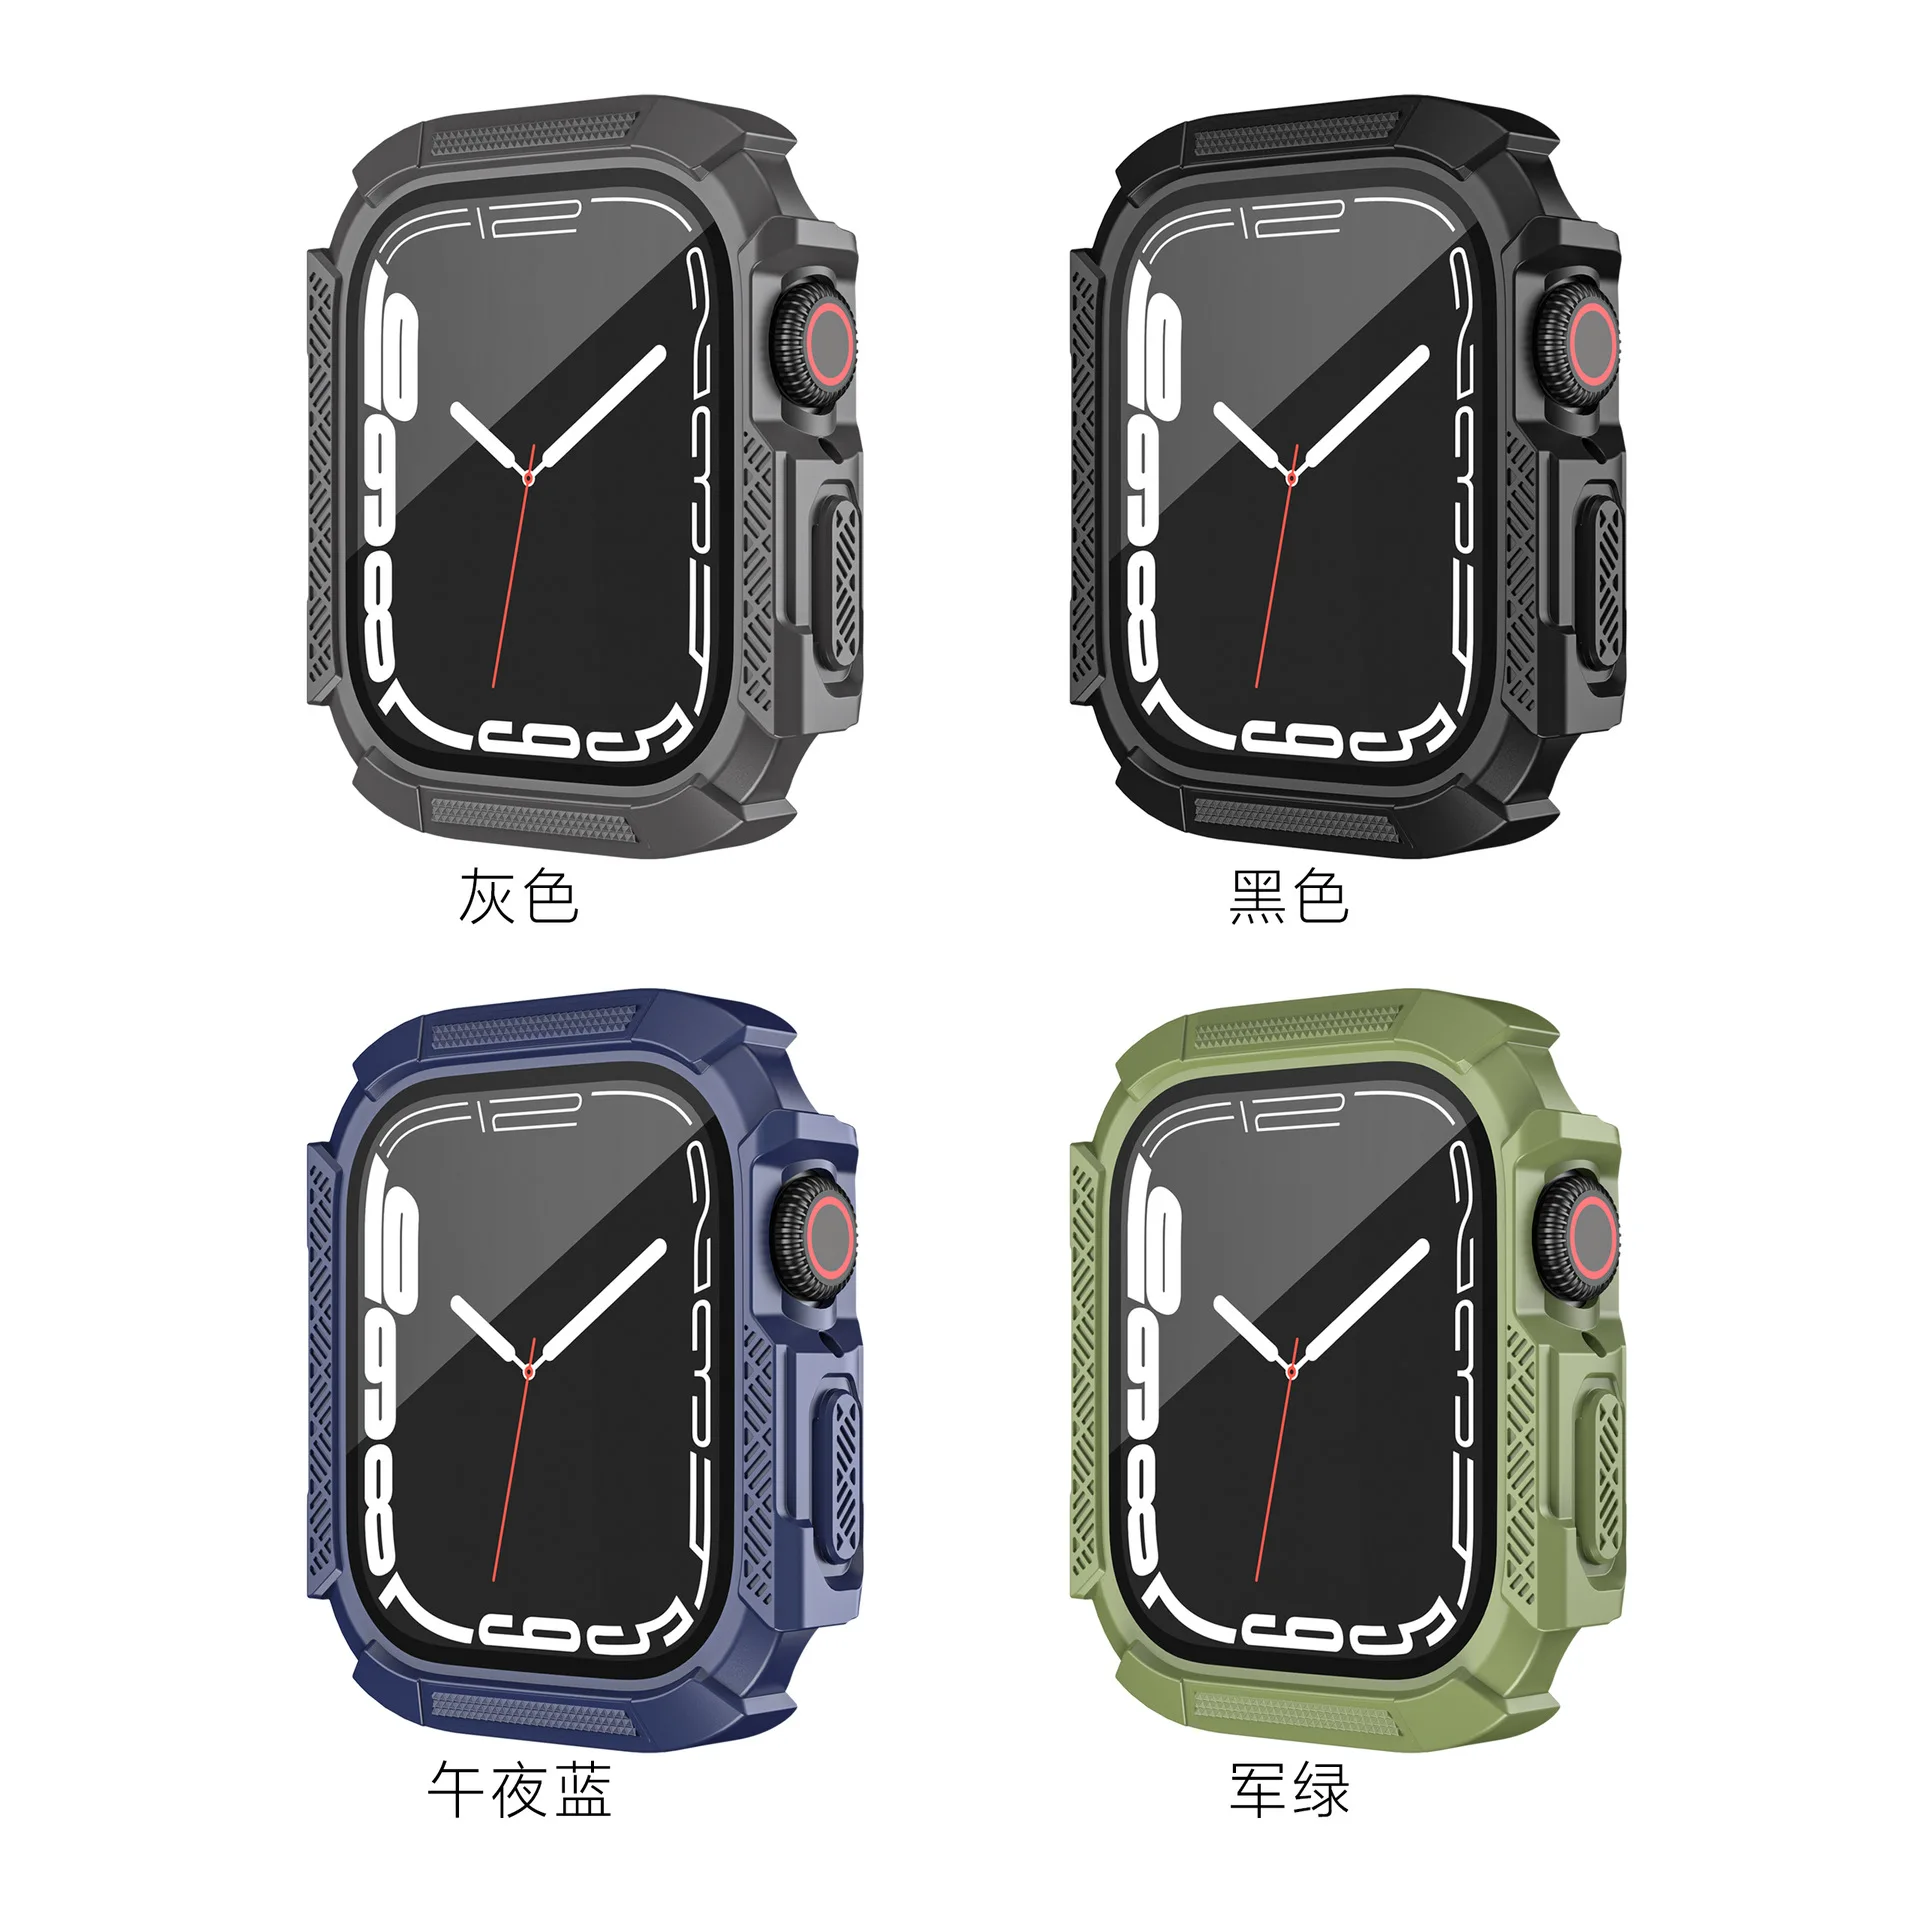 Suitable for apple watch shell protective shell pc armor integrated tempered film case enlarge